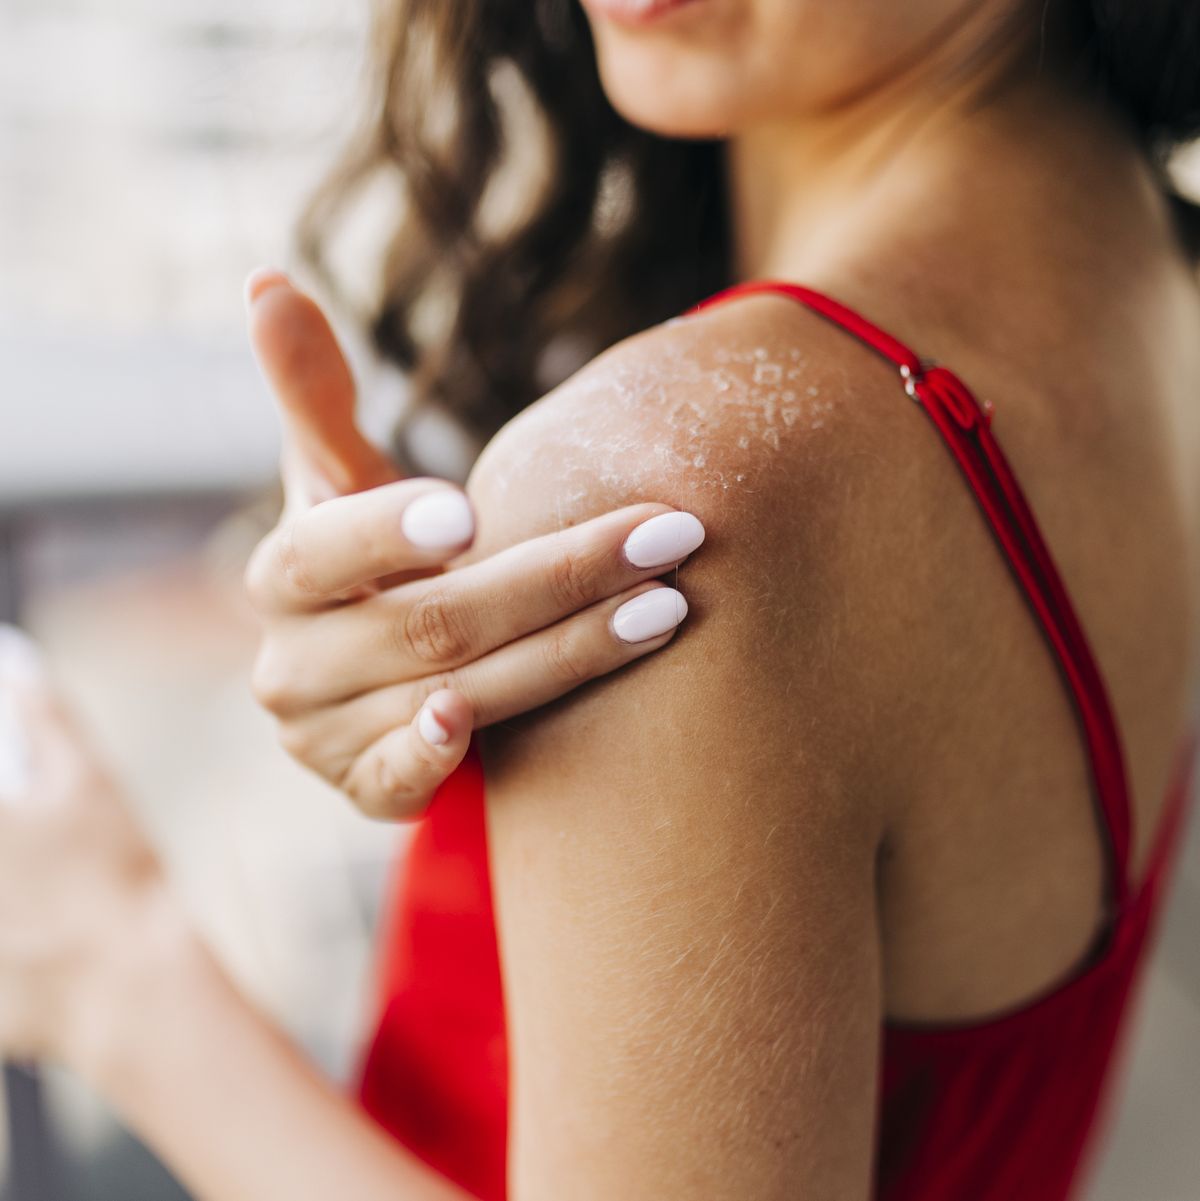 How to get rid of heat rash: Relieve redness and itchiness by doing this